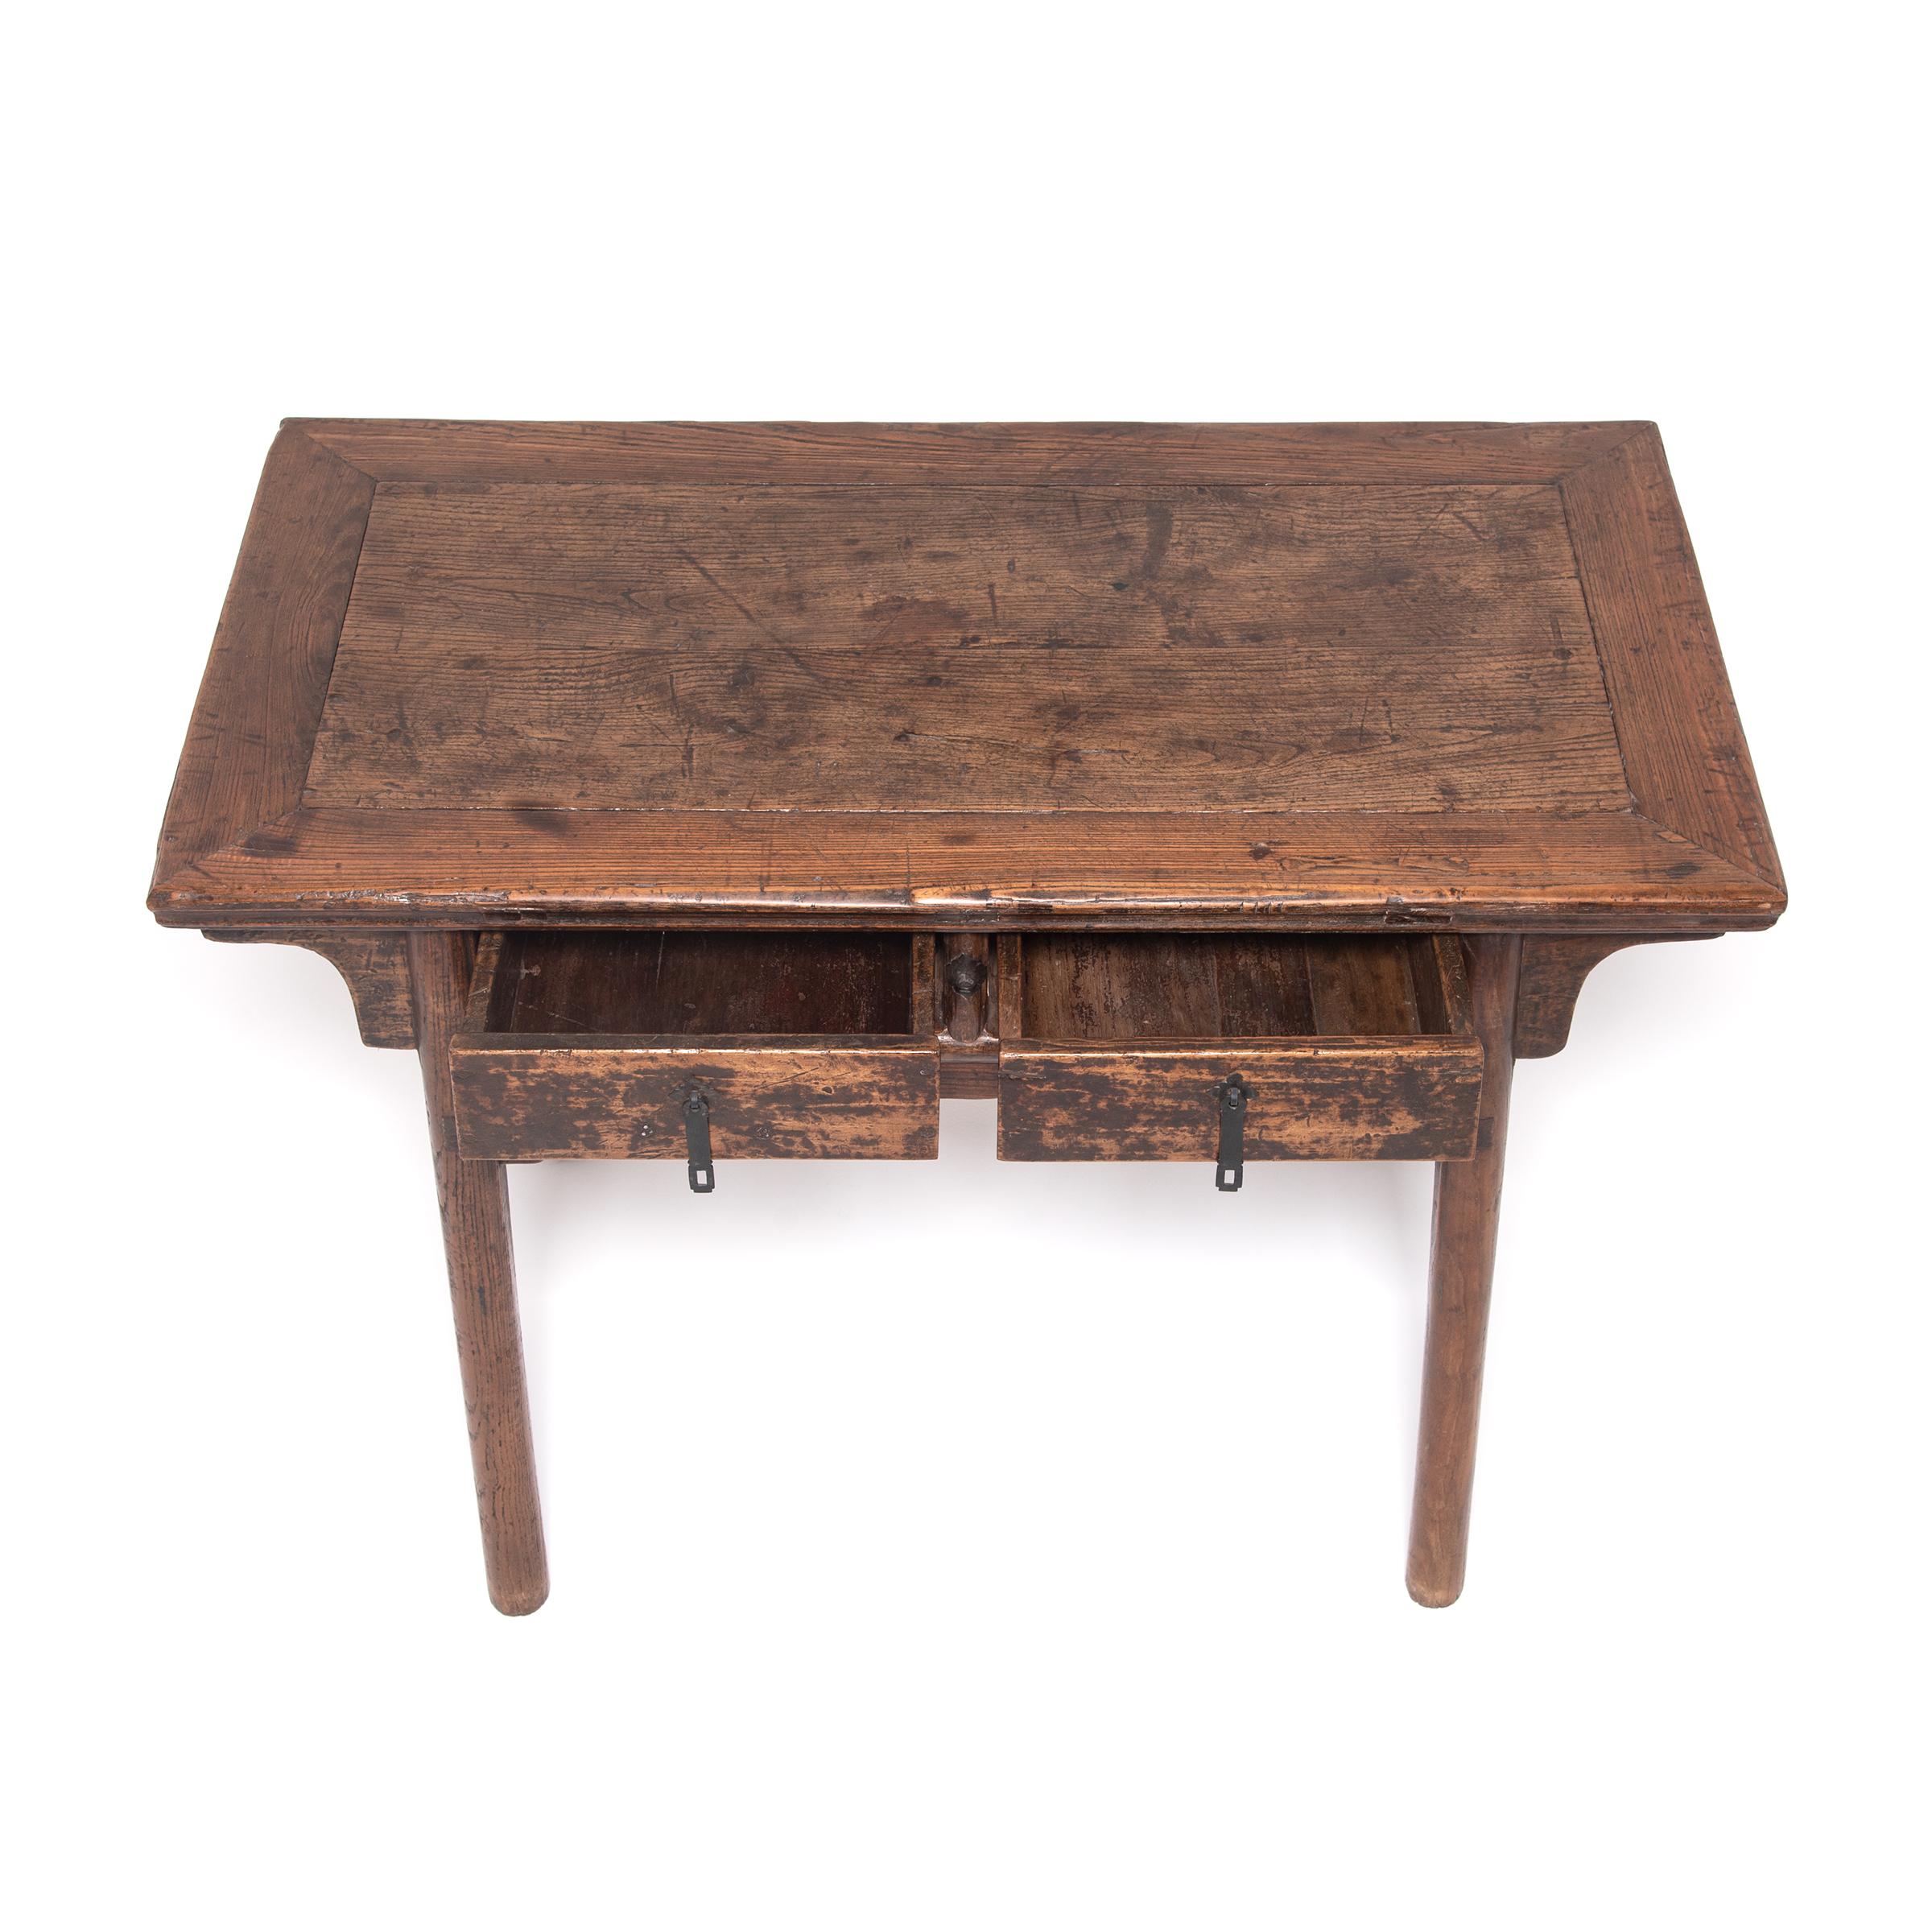 19th Century Provincial Chinese Two-Drawer Table, c. 1800 For Sale